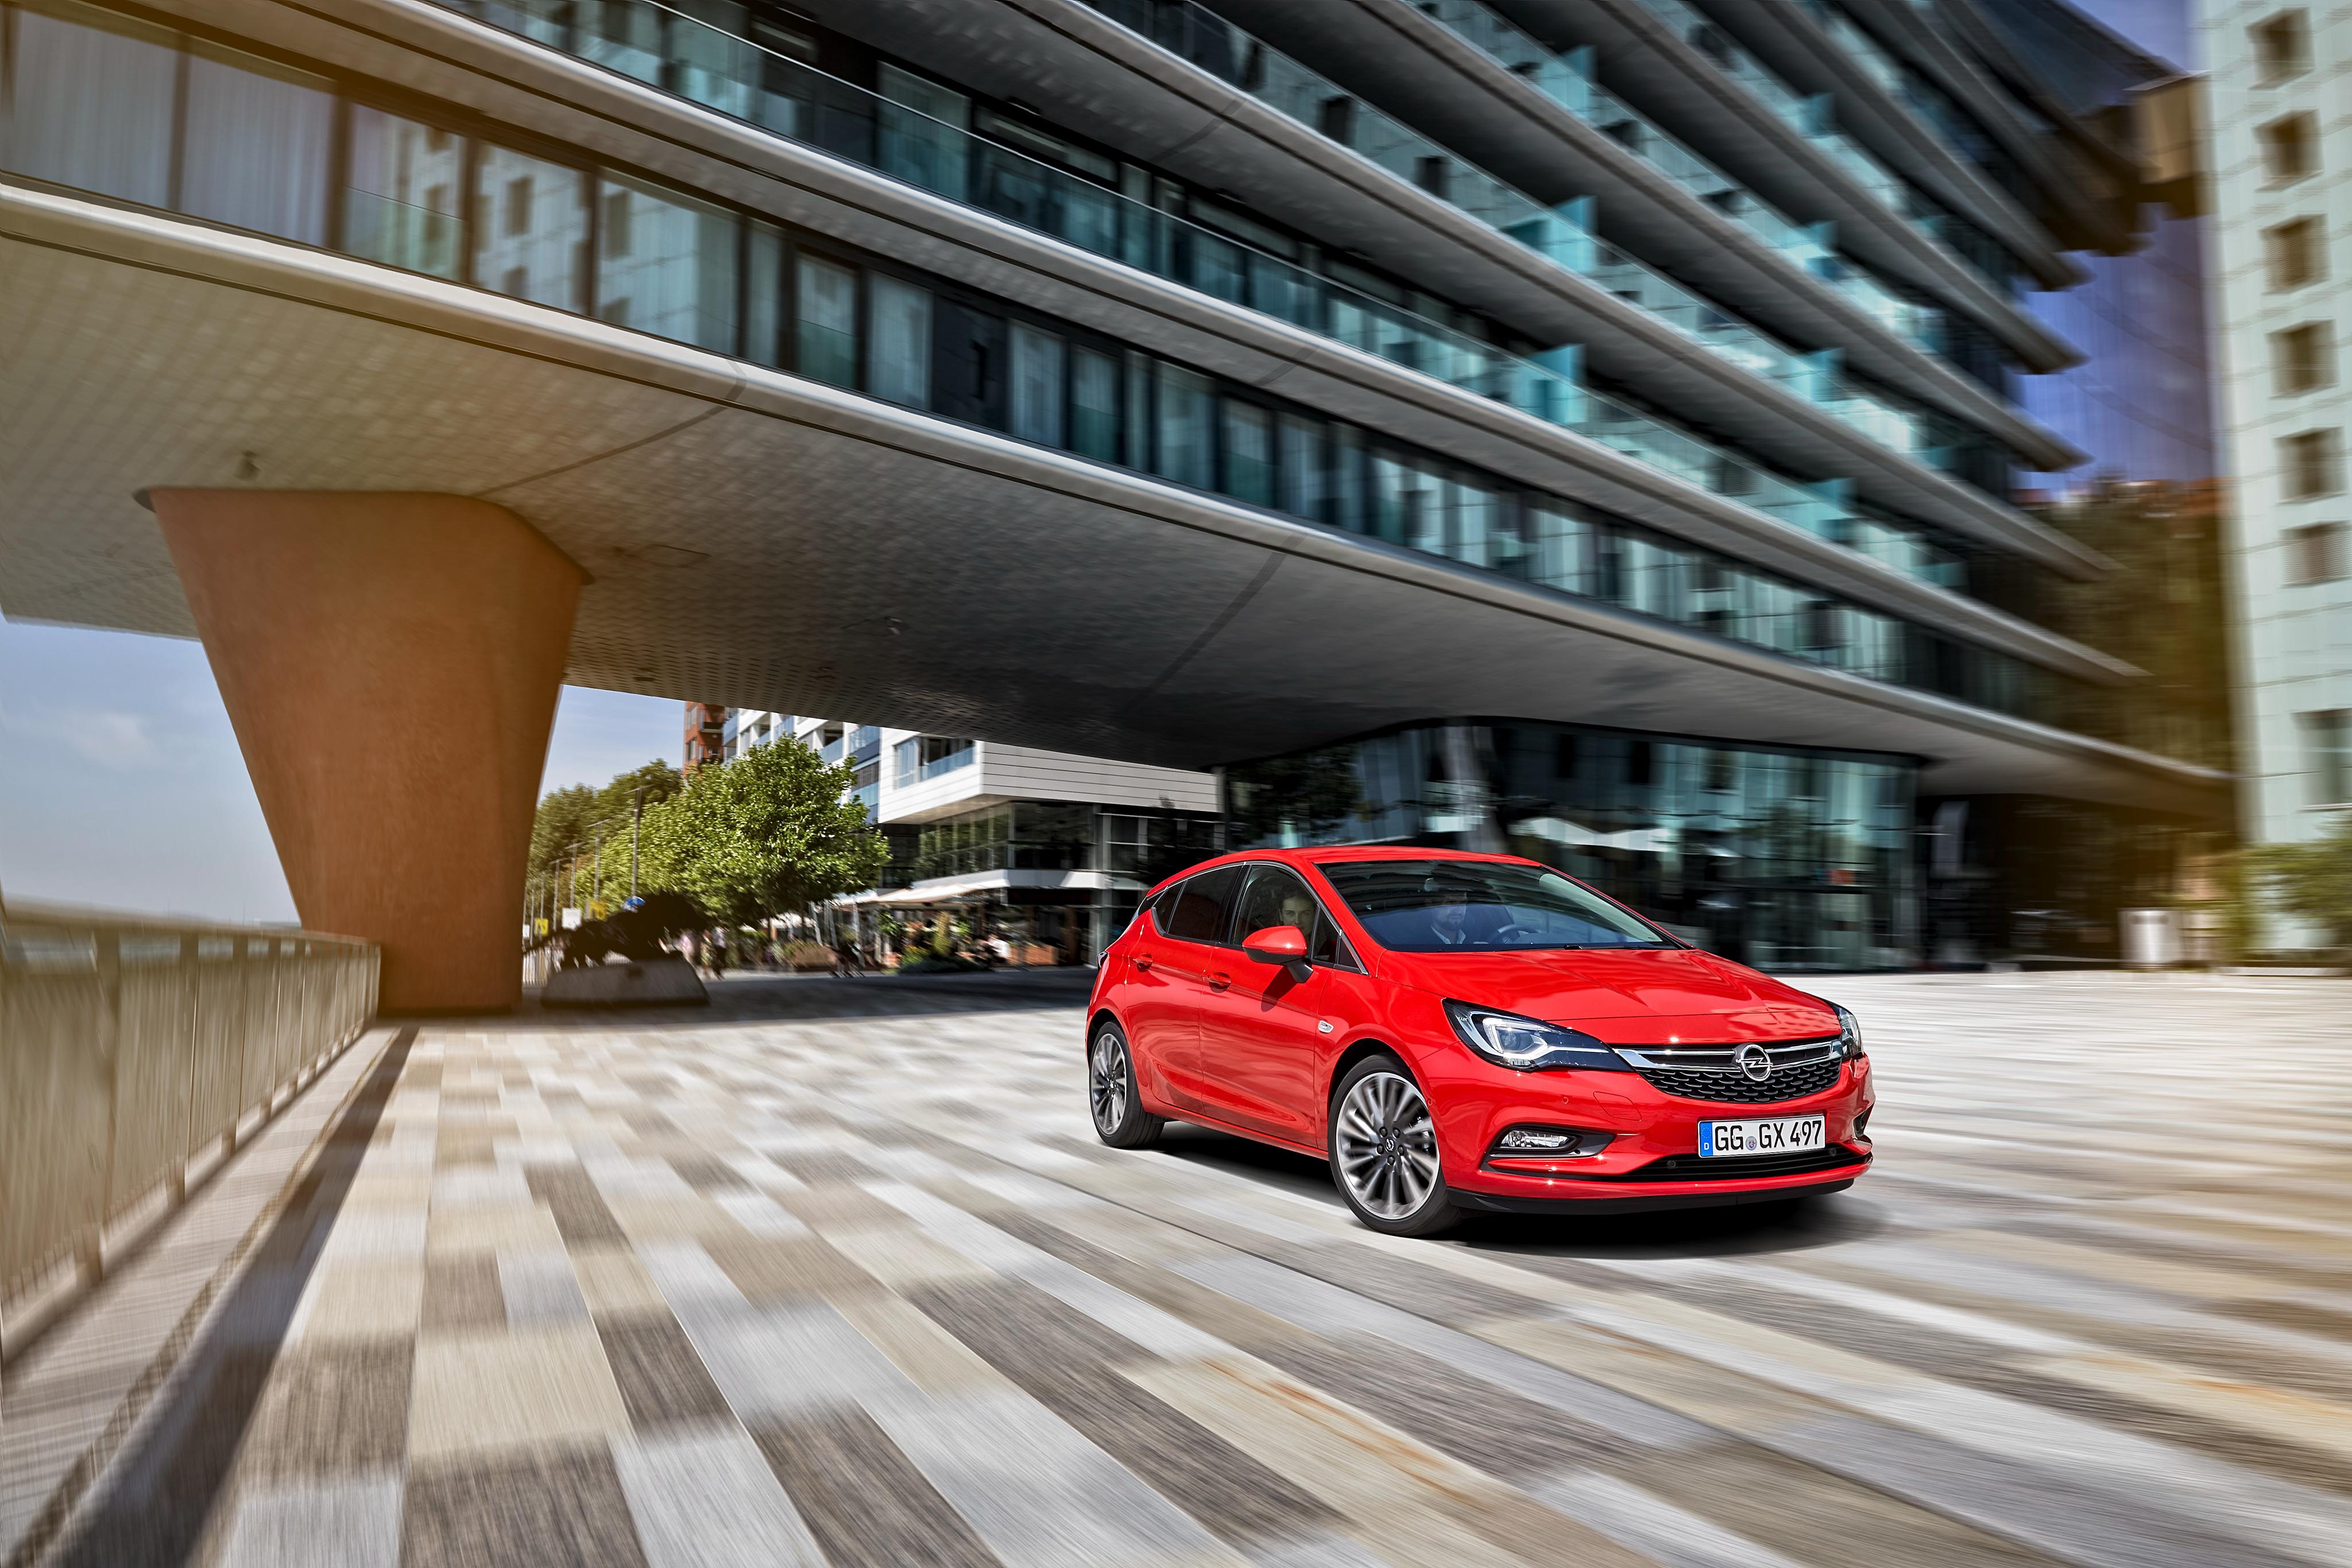 opel astra, vehicles, car, compact car, opel wallpaper for mobile